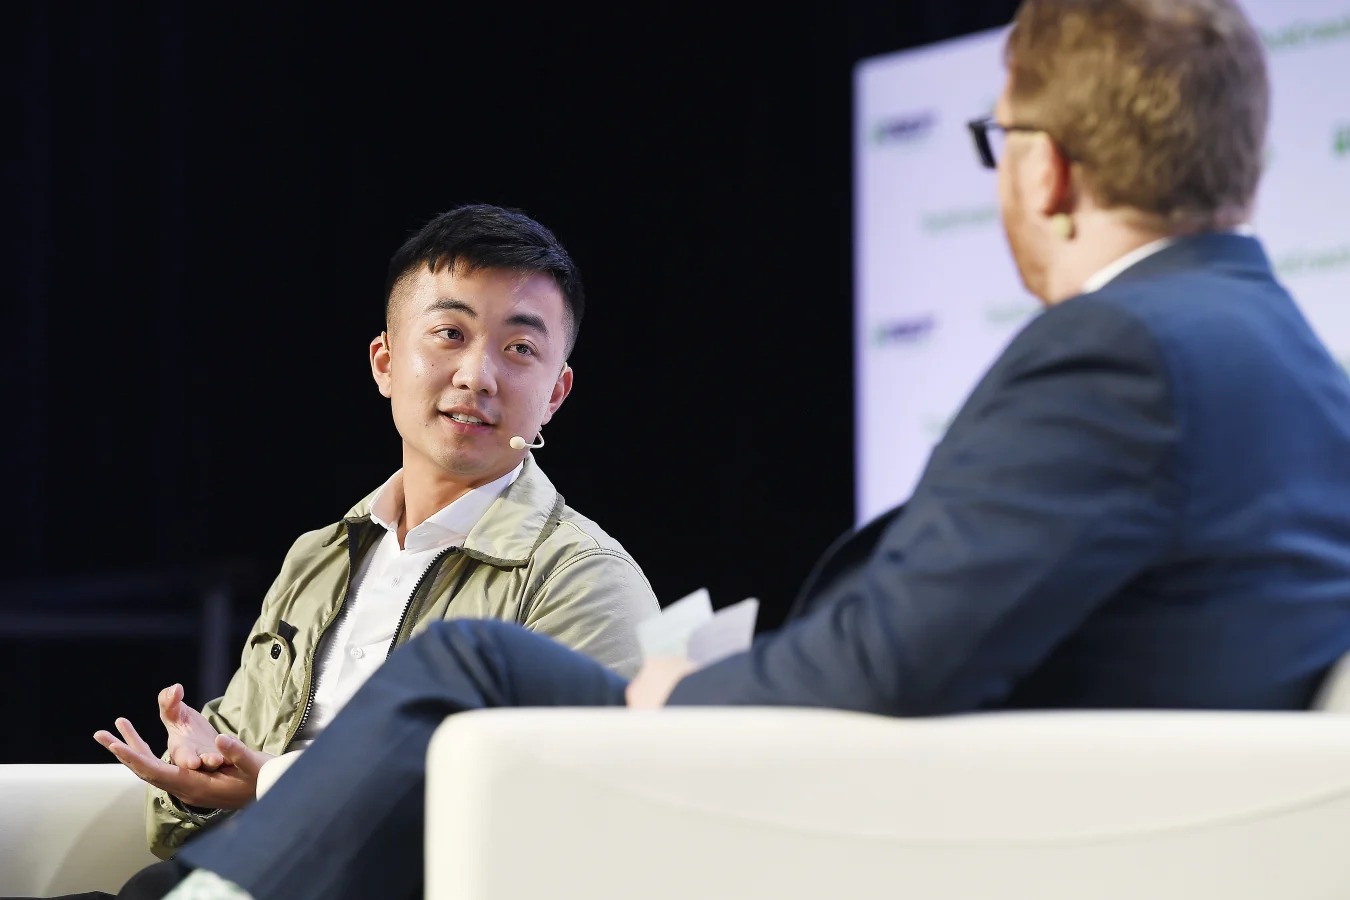 SAN FRANCISCO, CA - OCT 04: (LR) OnePlus Co-Founder Carl Pei and TechCrunch Hardware Editor Brian Heiter speak on stage during TechCrunch Disrupt San Francisco 2019 at Moscone Convention Center on October 04, 2019 in San Francisco, California.  (Photo by Steve Jennings/Getty Images for TechCrunch)